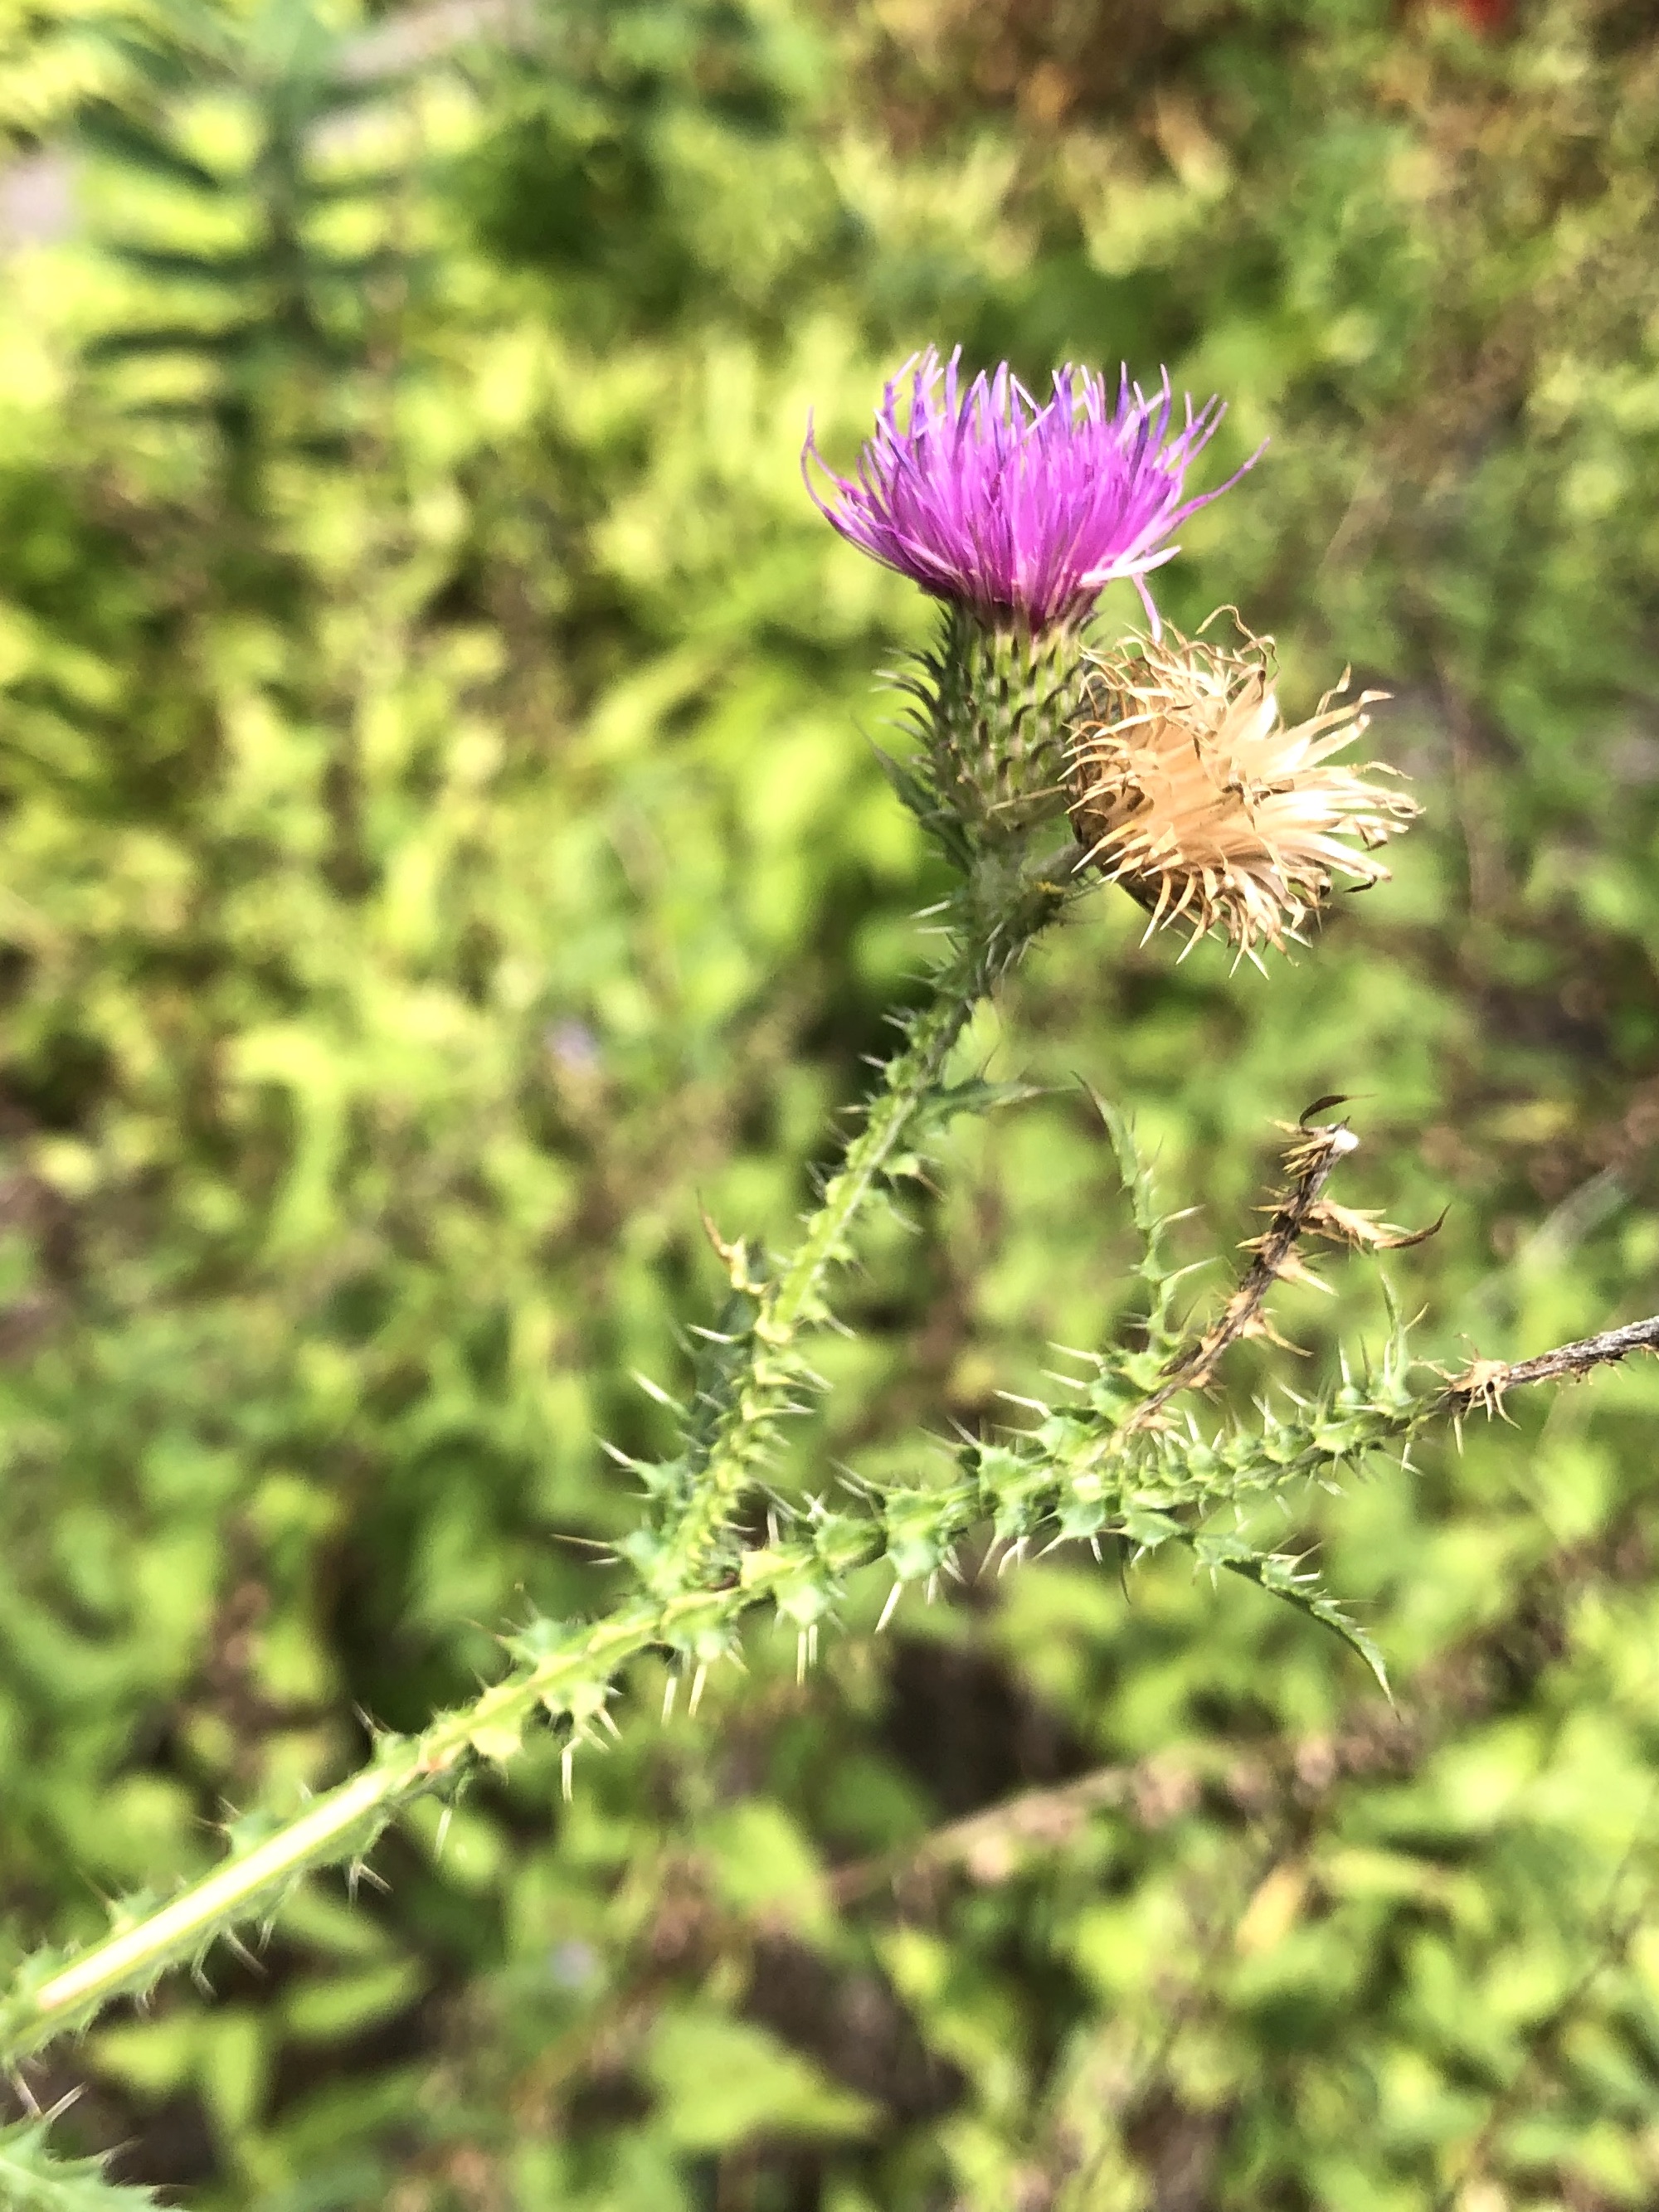 Plumeless Thistle by sidewalk on Tumalo Trail in Madison, Wisconsin on August 22, 2022.